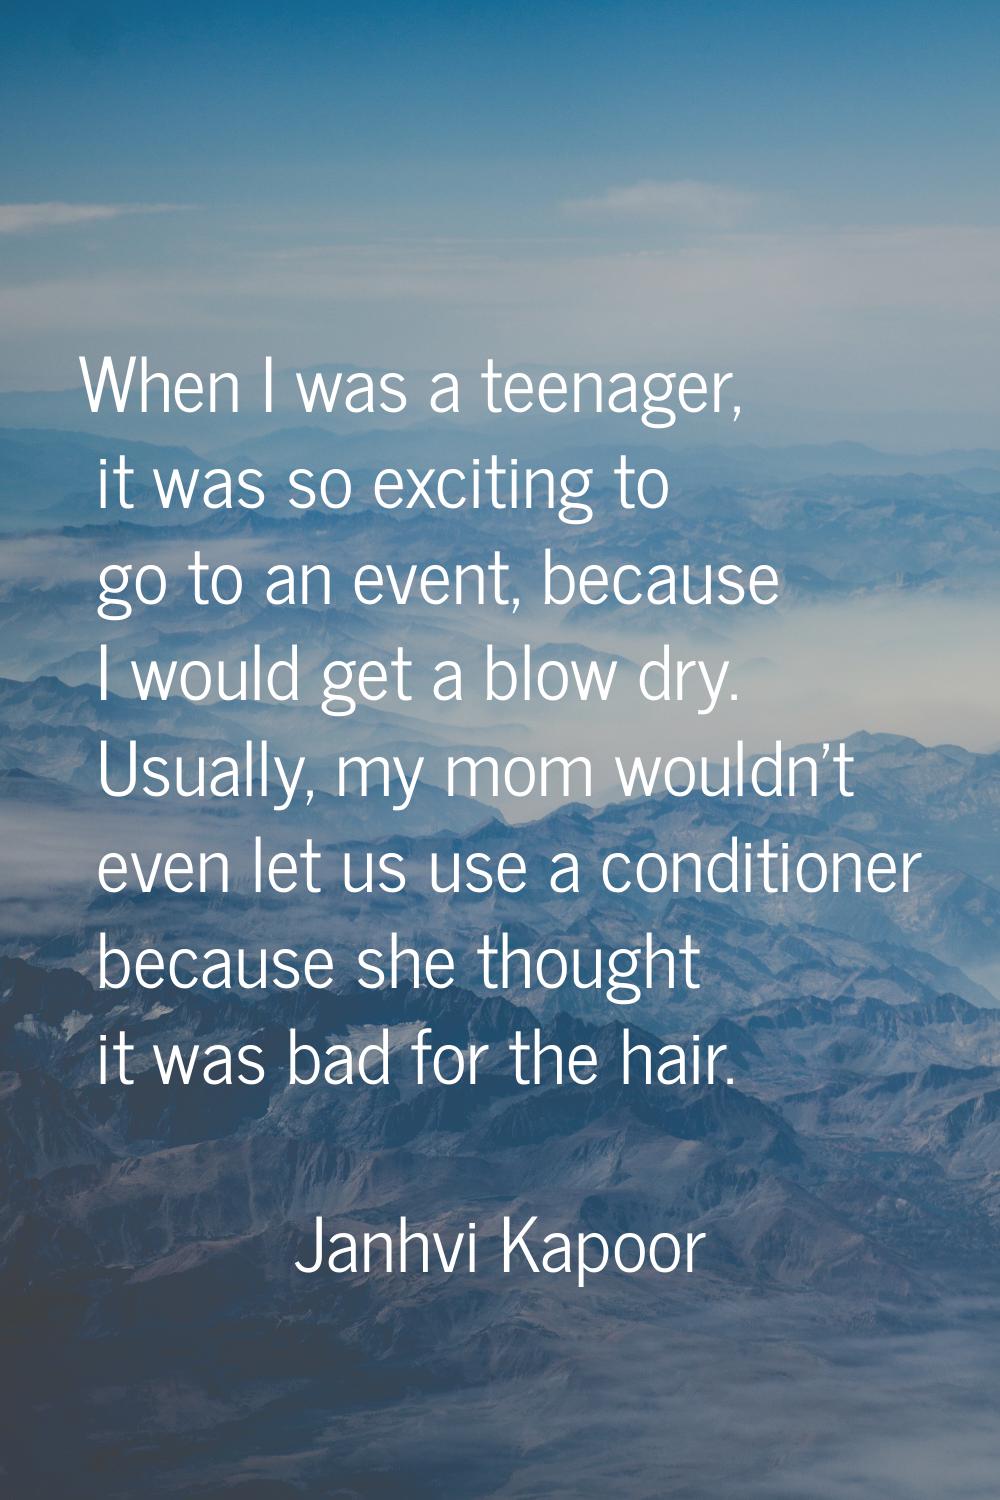 When I was a teenager, it was so exciting to go to an event, because I would get a blow dry. Usuall